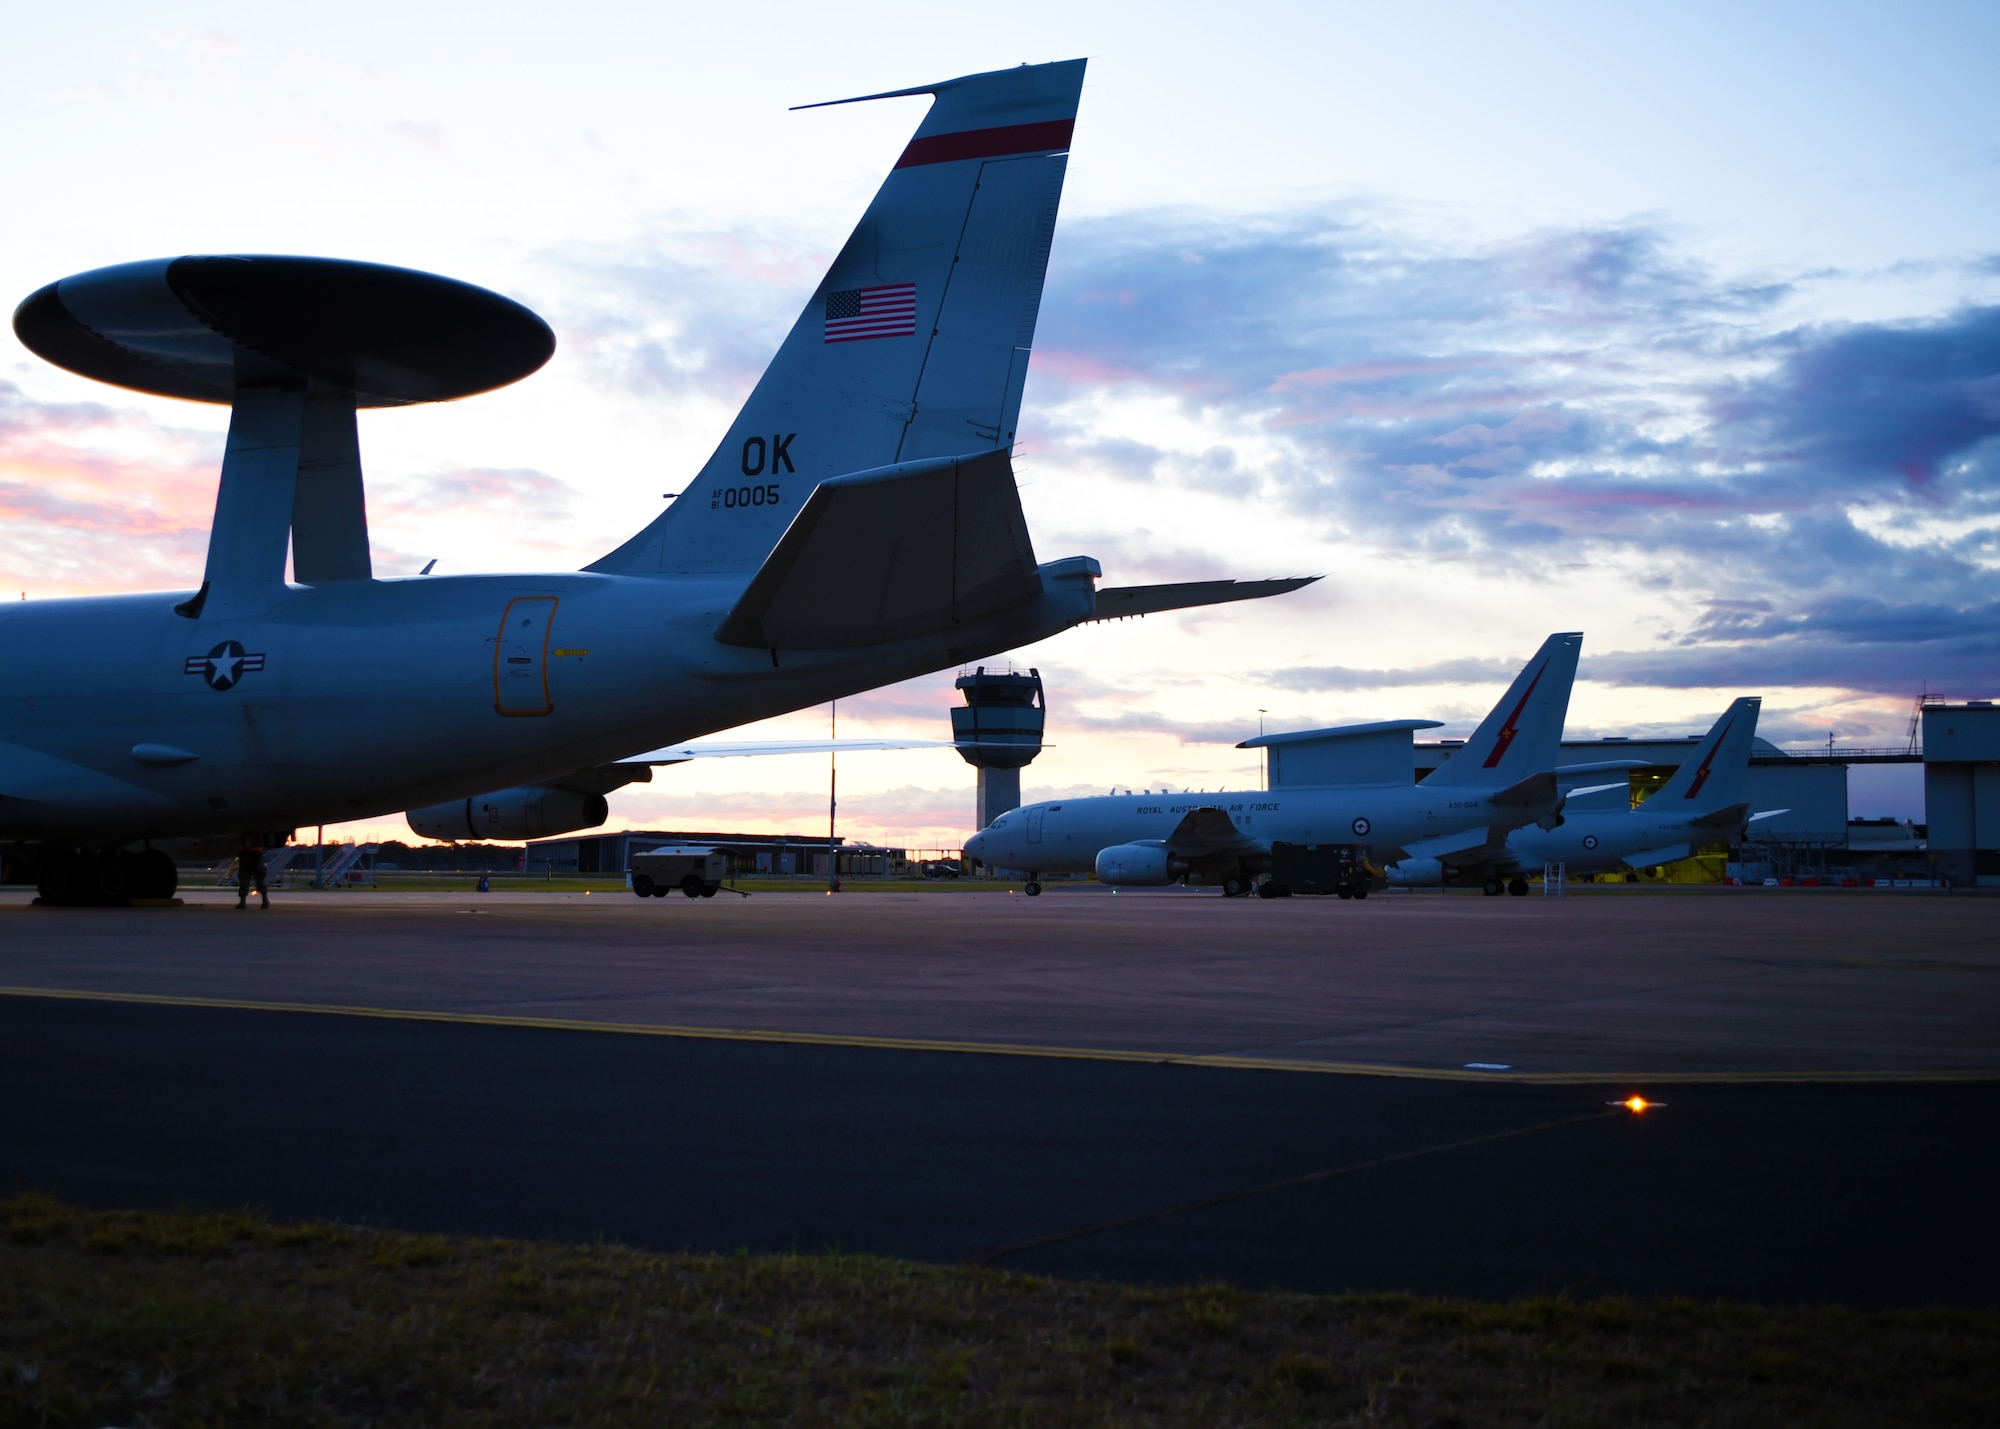 An E-3G Airborne Warning and Control System aircraft of the 552nd Air Control Wing, 960th Airborne Air Control Squadron, joins the Royal Australian Air Force E-7A Airborne Early Warning and Control aircraft in September 2019, Williamtown, Australia. The AWACS joined the RAAF to work on mission integration and partnership of similar airframes in response to the E-7A AEWC visiting the 552nd ACW in 2017. (U.S. Air Force photo/2d Lt Ashlyn K. Paulson)